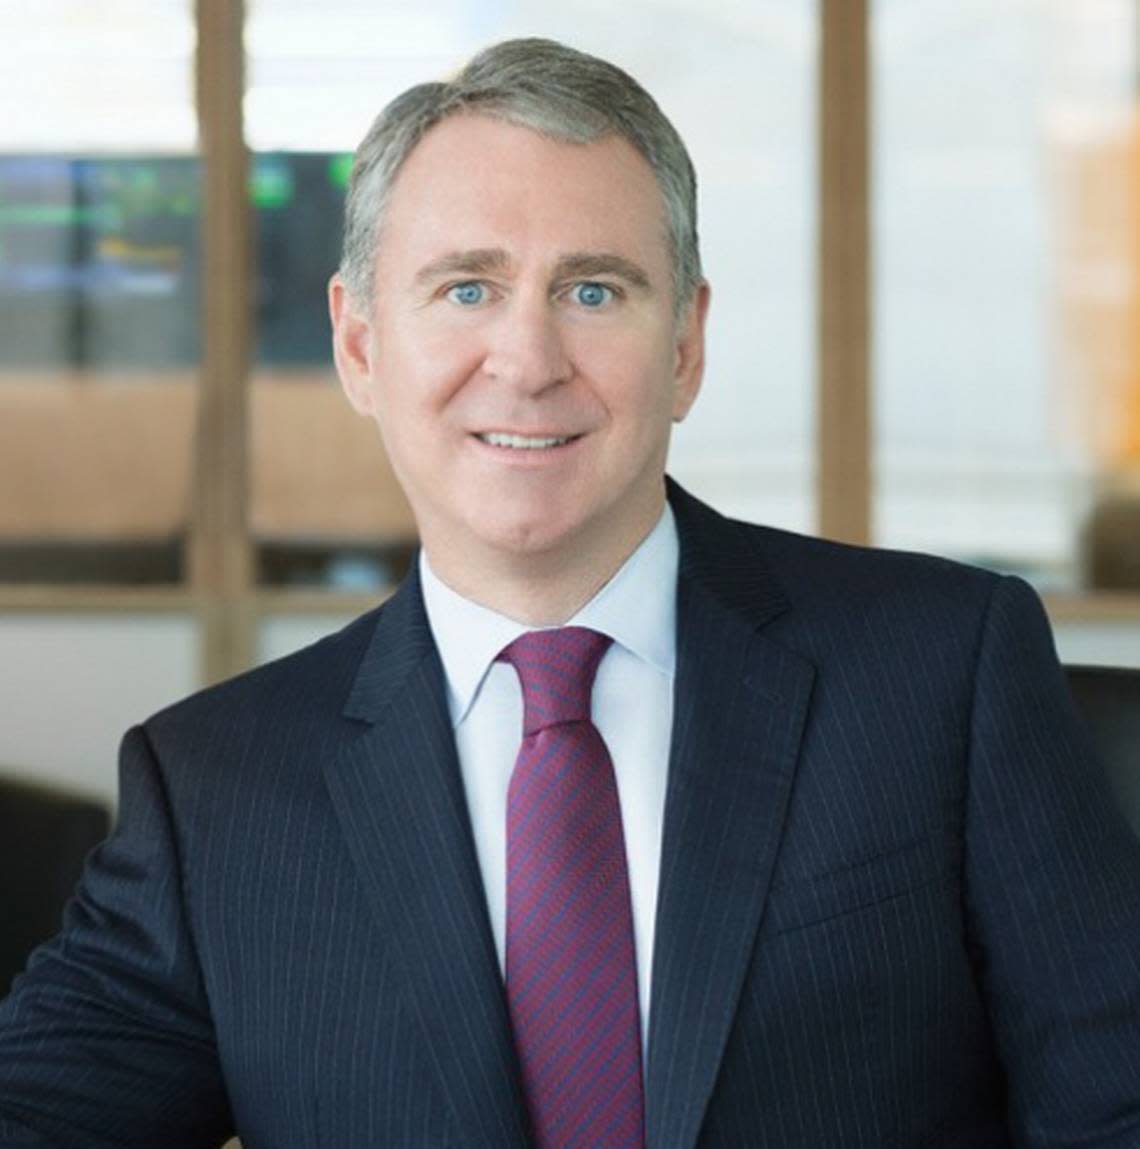 Citadel CEO Kenneth Griffin acquired the Arsht Estate in Miami for $106.9 million on Friday. The purchase comes after Griffin announced plans in June to move his financial securities firm Citadel to Miami from Chicago.